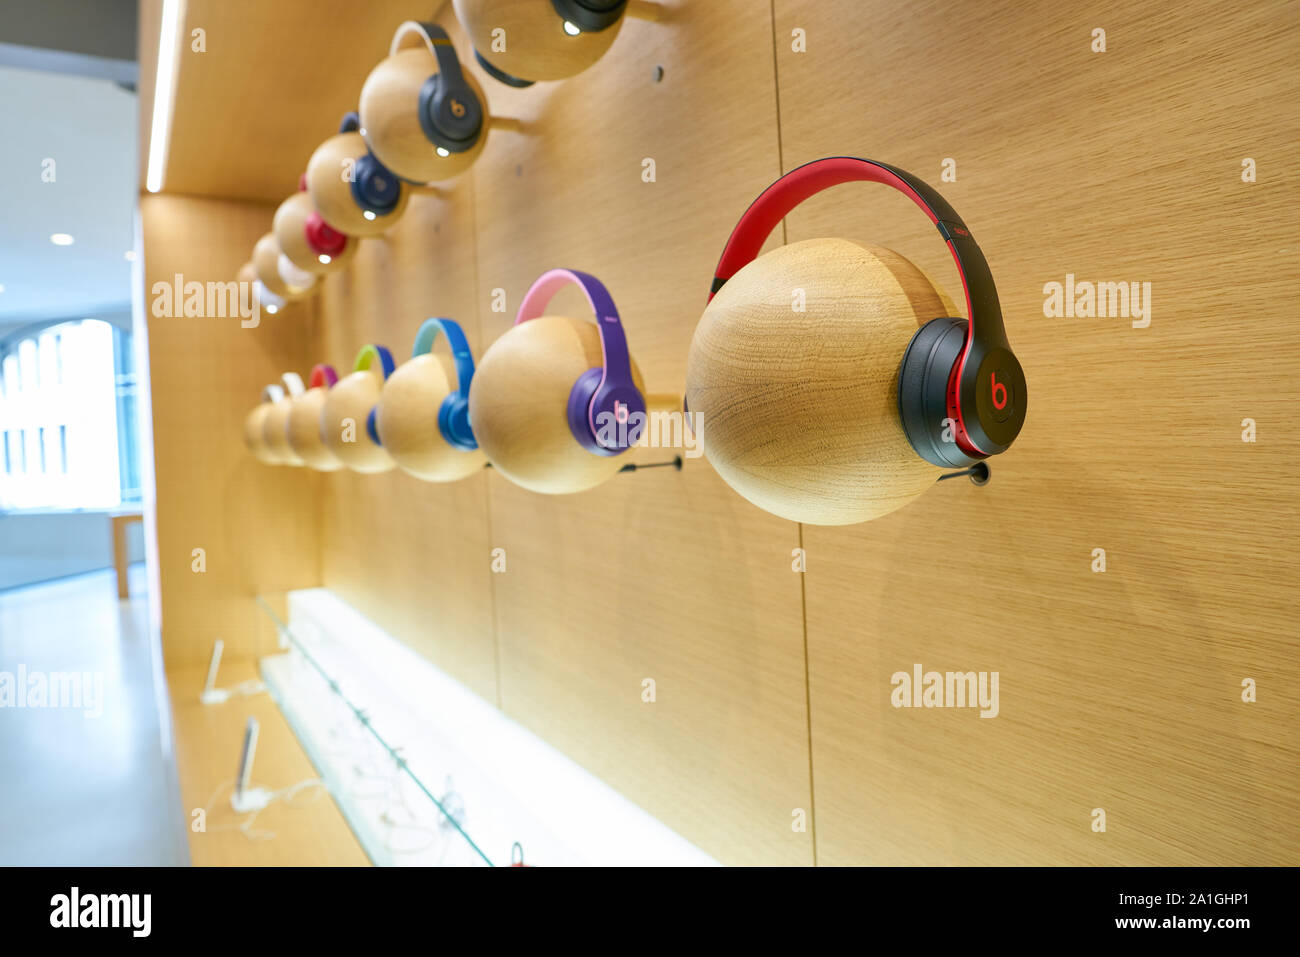 COLOGNE, GERMANY - CIRCA OCTOBER, 2018: Beats headphones on display at Apple store in Cologne. Stock Photo